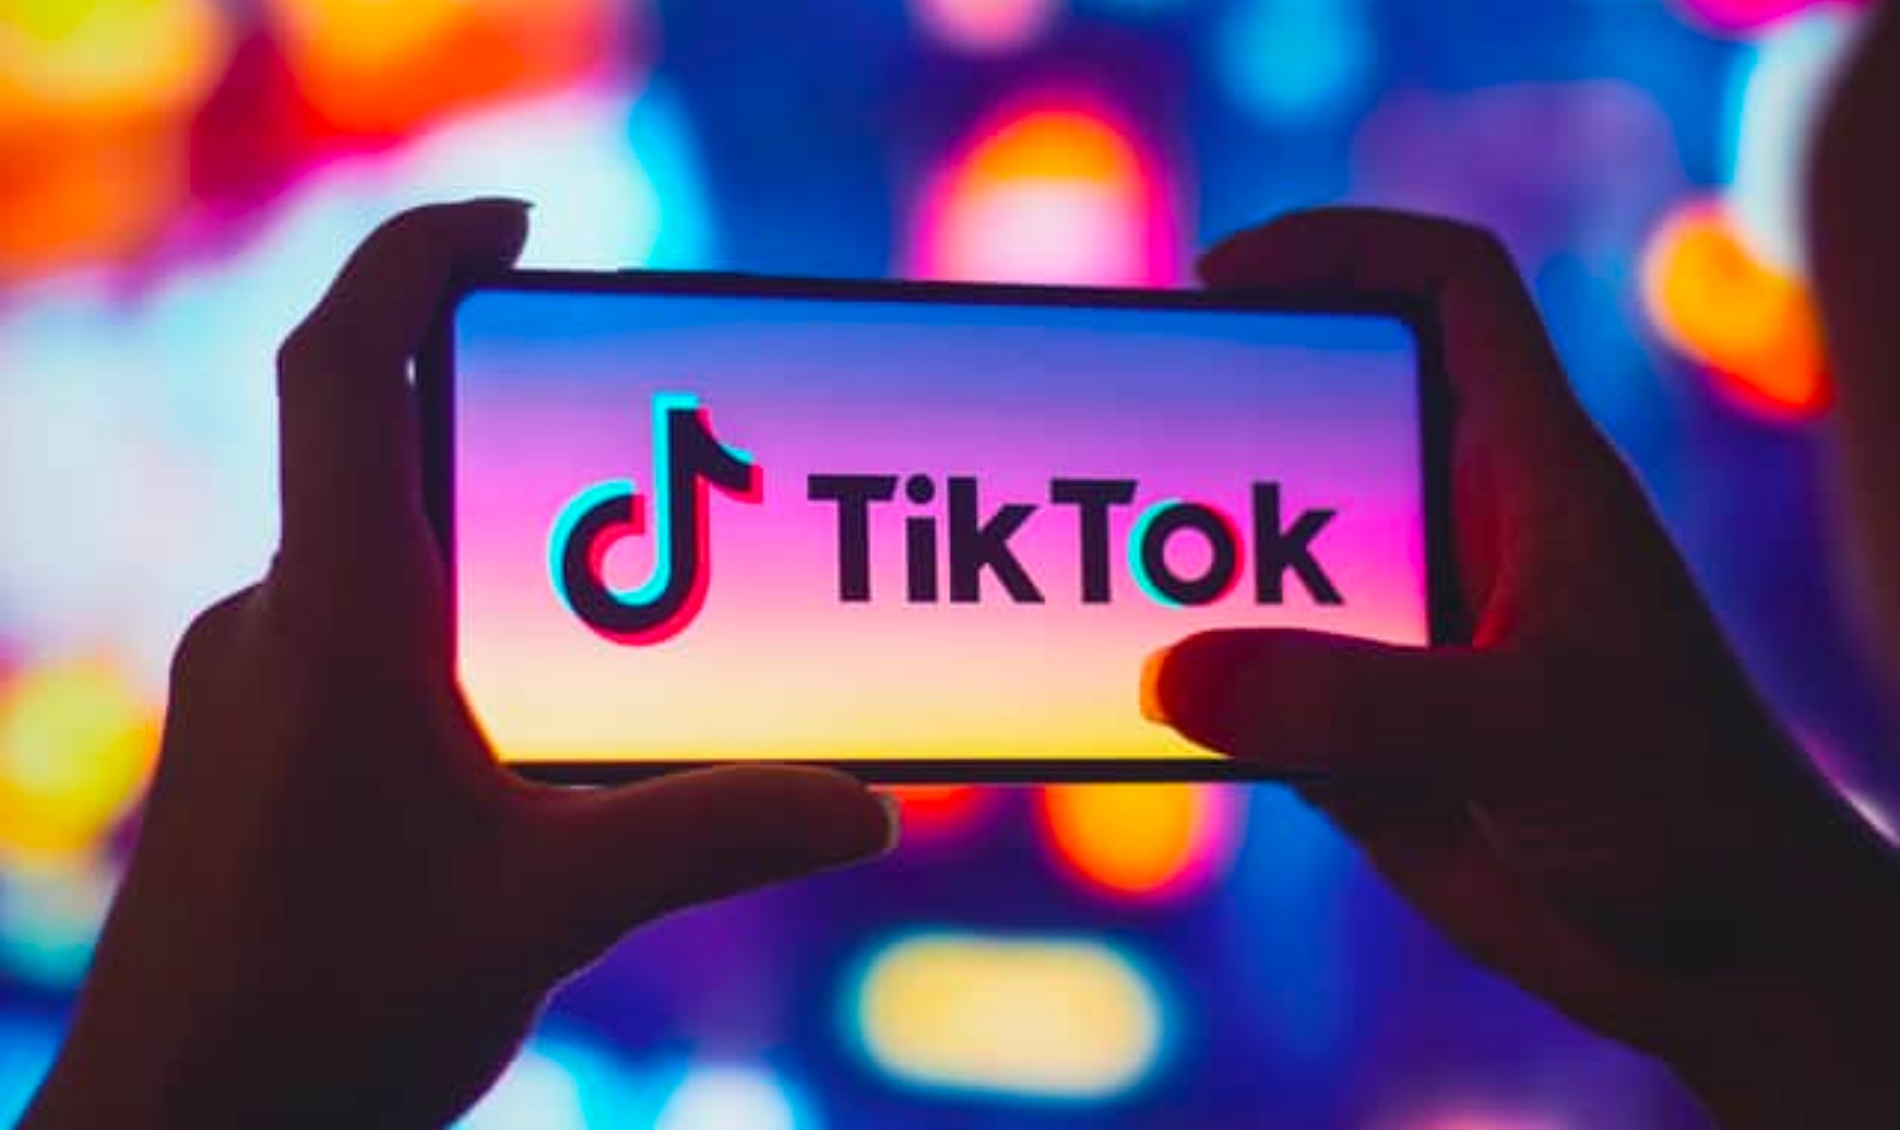 TikTok Expands Advertising Reach With “Out Of Phone” Program